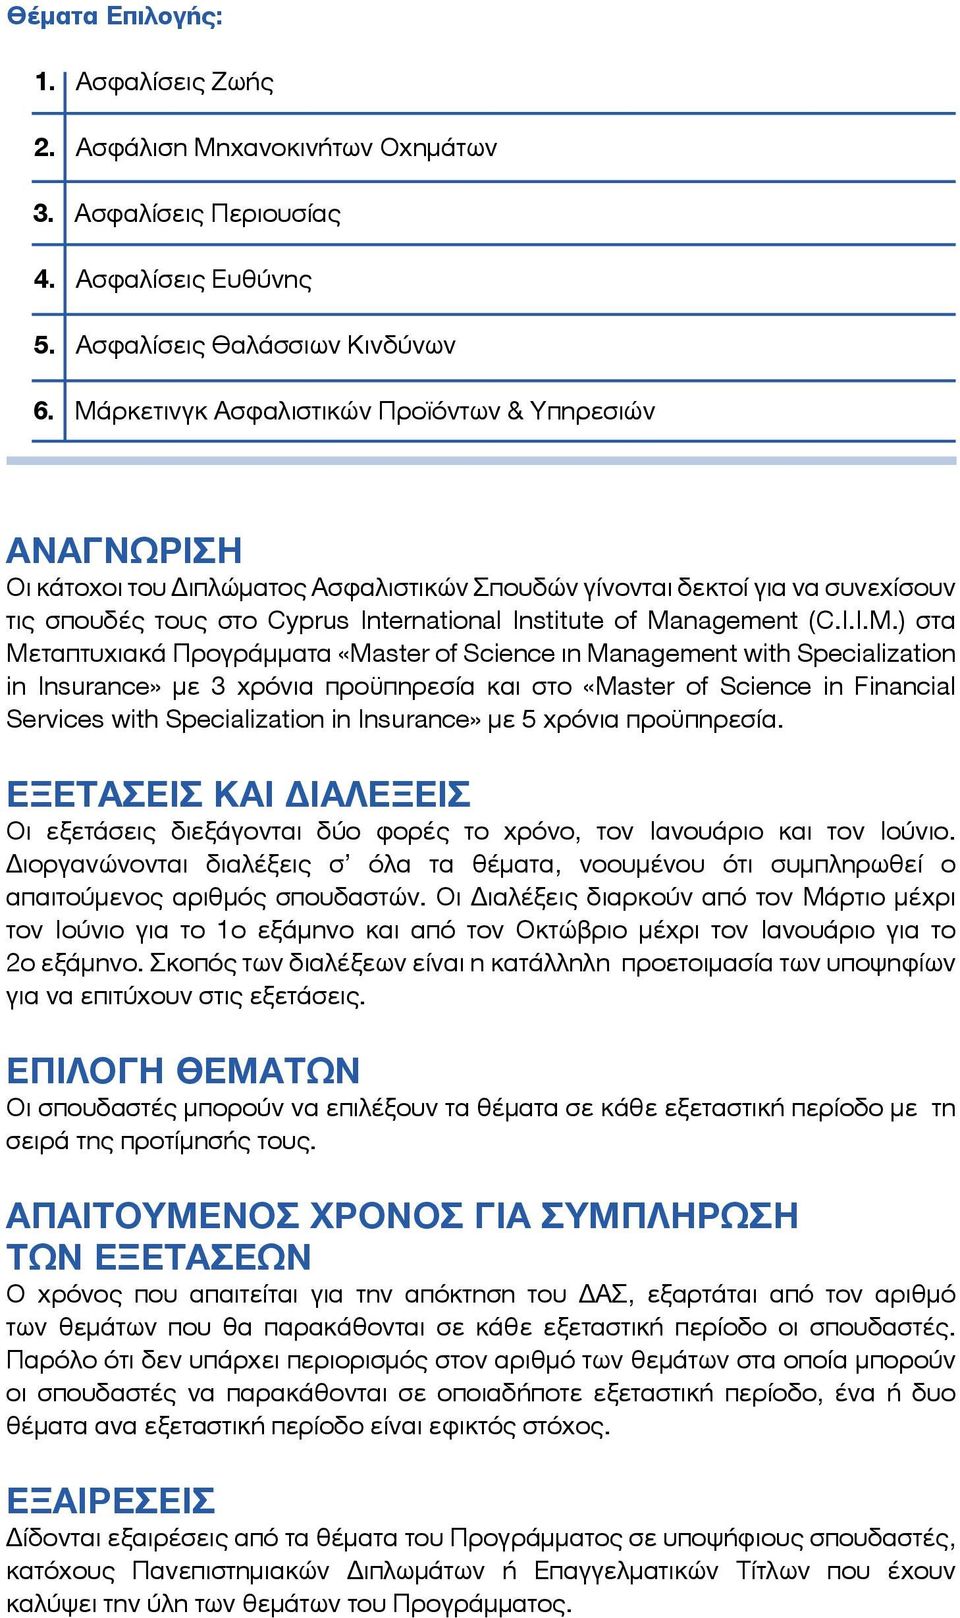 Management (C.I.I.M.) στα Μεταπτυχιακά Προγράμματα «Master of Science ιn Management with Specialization in Insurance» με 3 χρόνια προϋπηρεσία και στο «Master of Science in Financial Services with